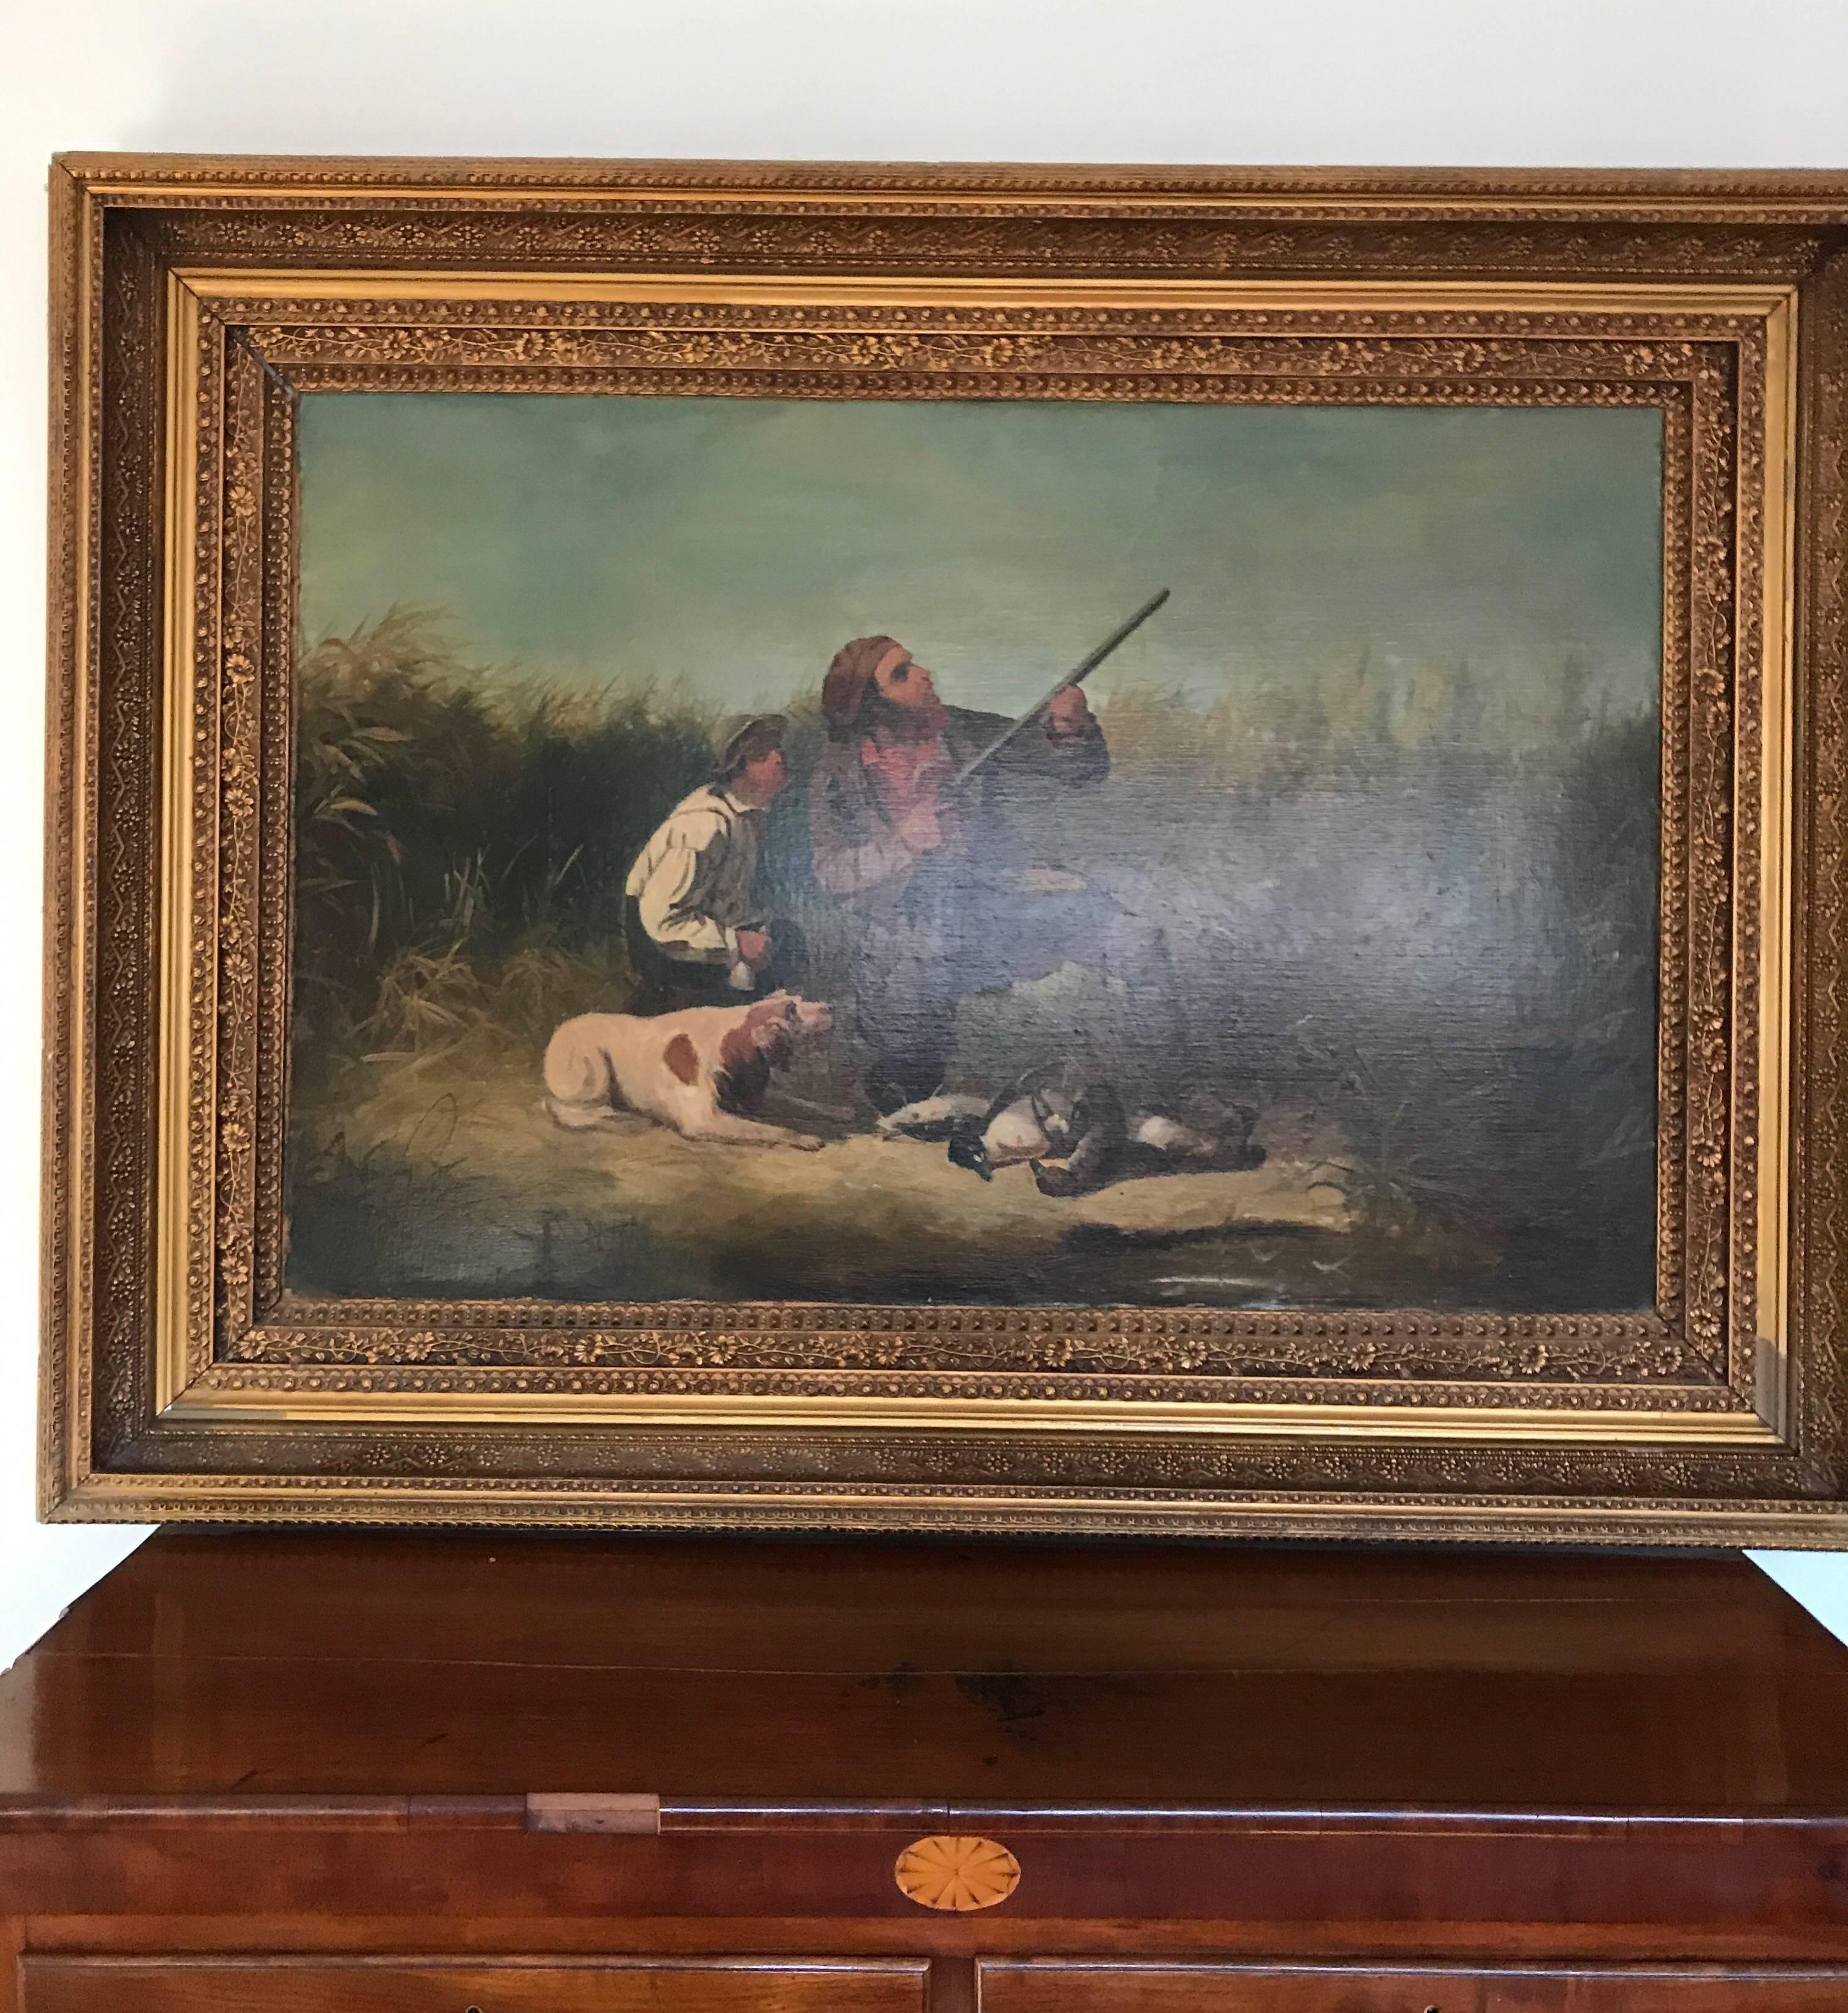 A late 19th century copy of William Tylee Ranney's iconic 1850 work On The Wing.
The painting is unsigned and is by a follower of Ranney. Ranney was a 19th century painter
known for his homespun depictions of Western life, sporting scenery and